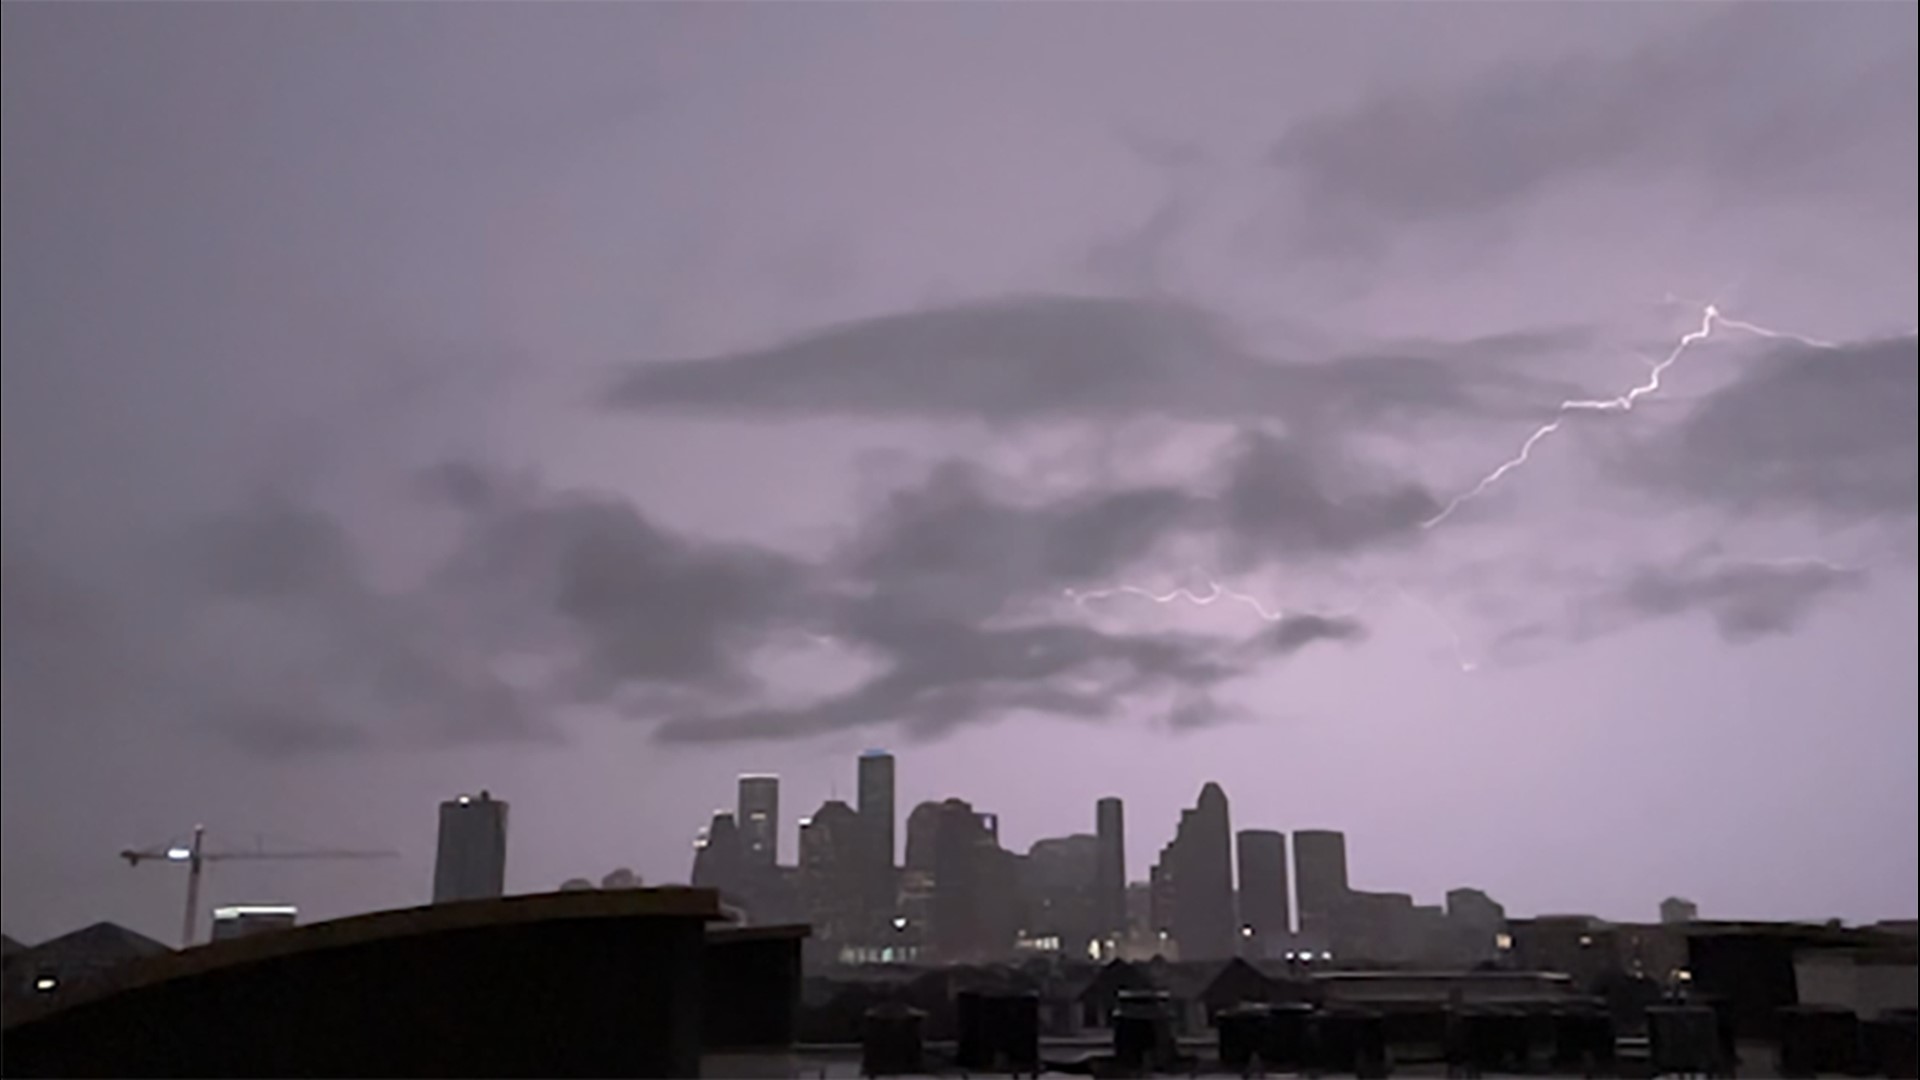 A bolt of lightning lit up the night sky in Houston on Wednesday, Aug. 10, 2022.